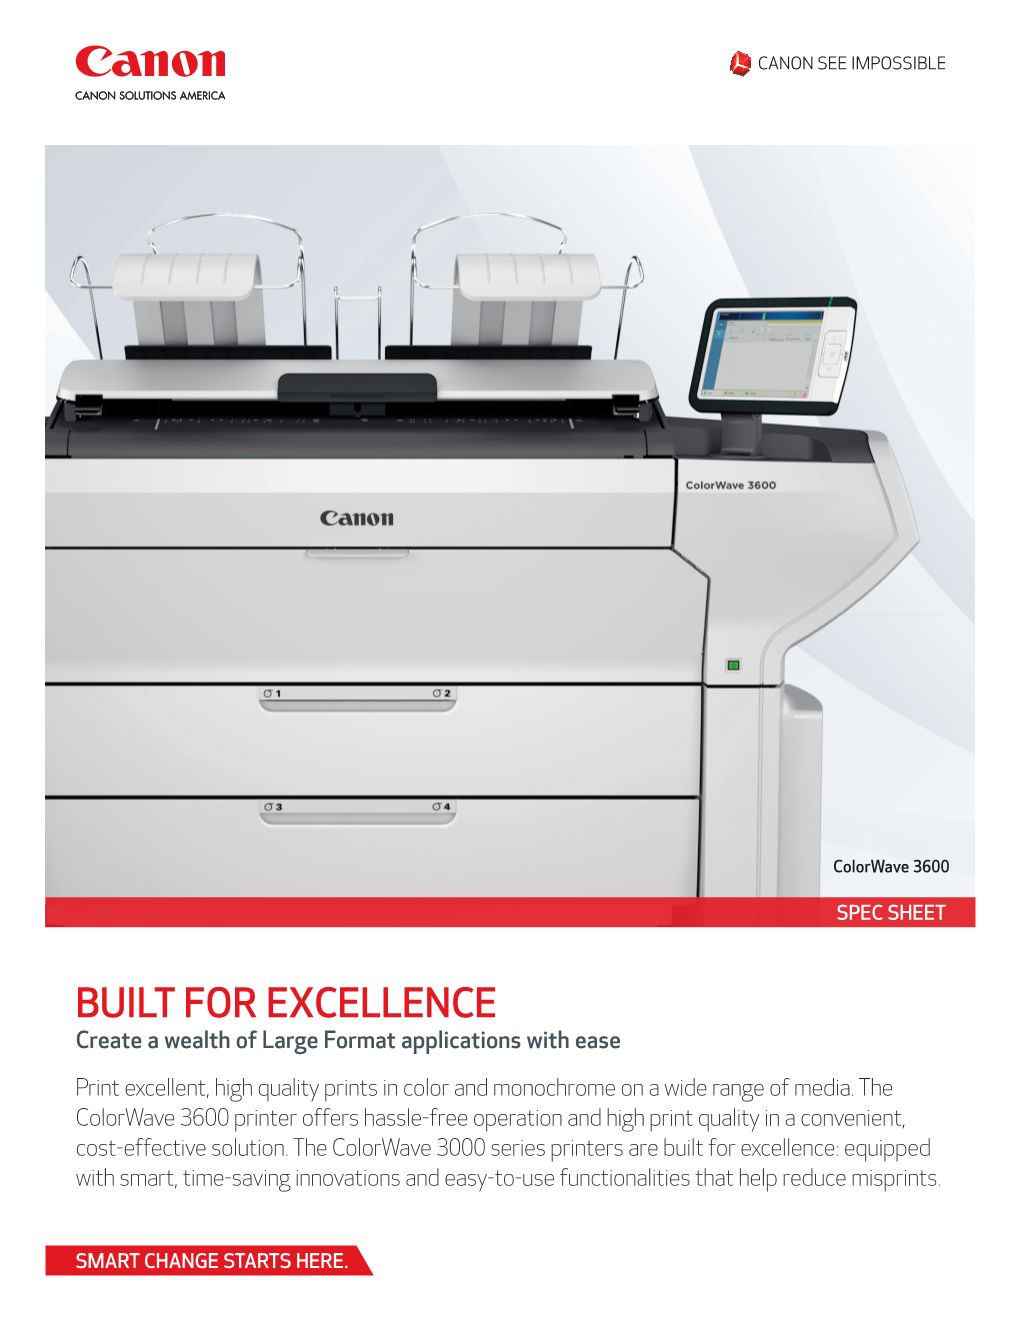 BUILT for EXCELLENCE Create a Wealth of Large Format Applications with Ease